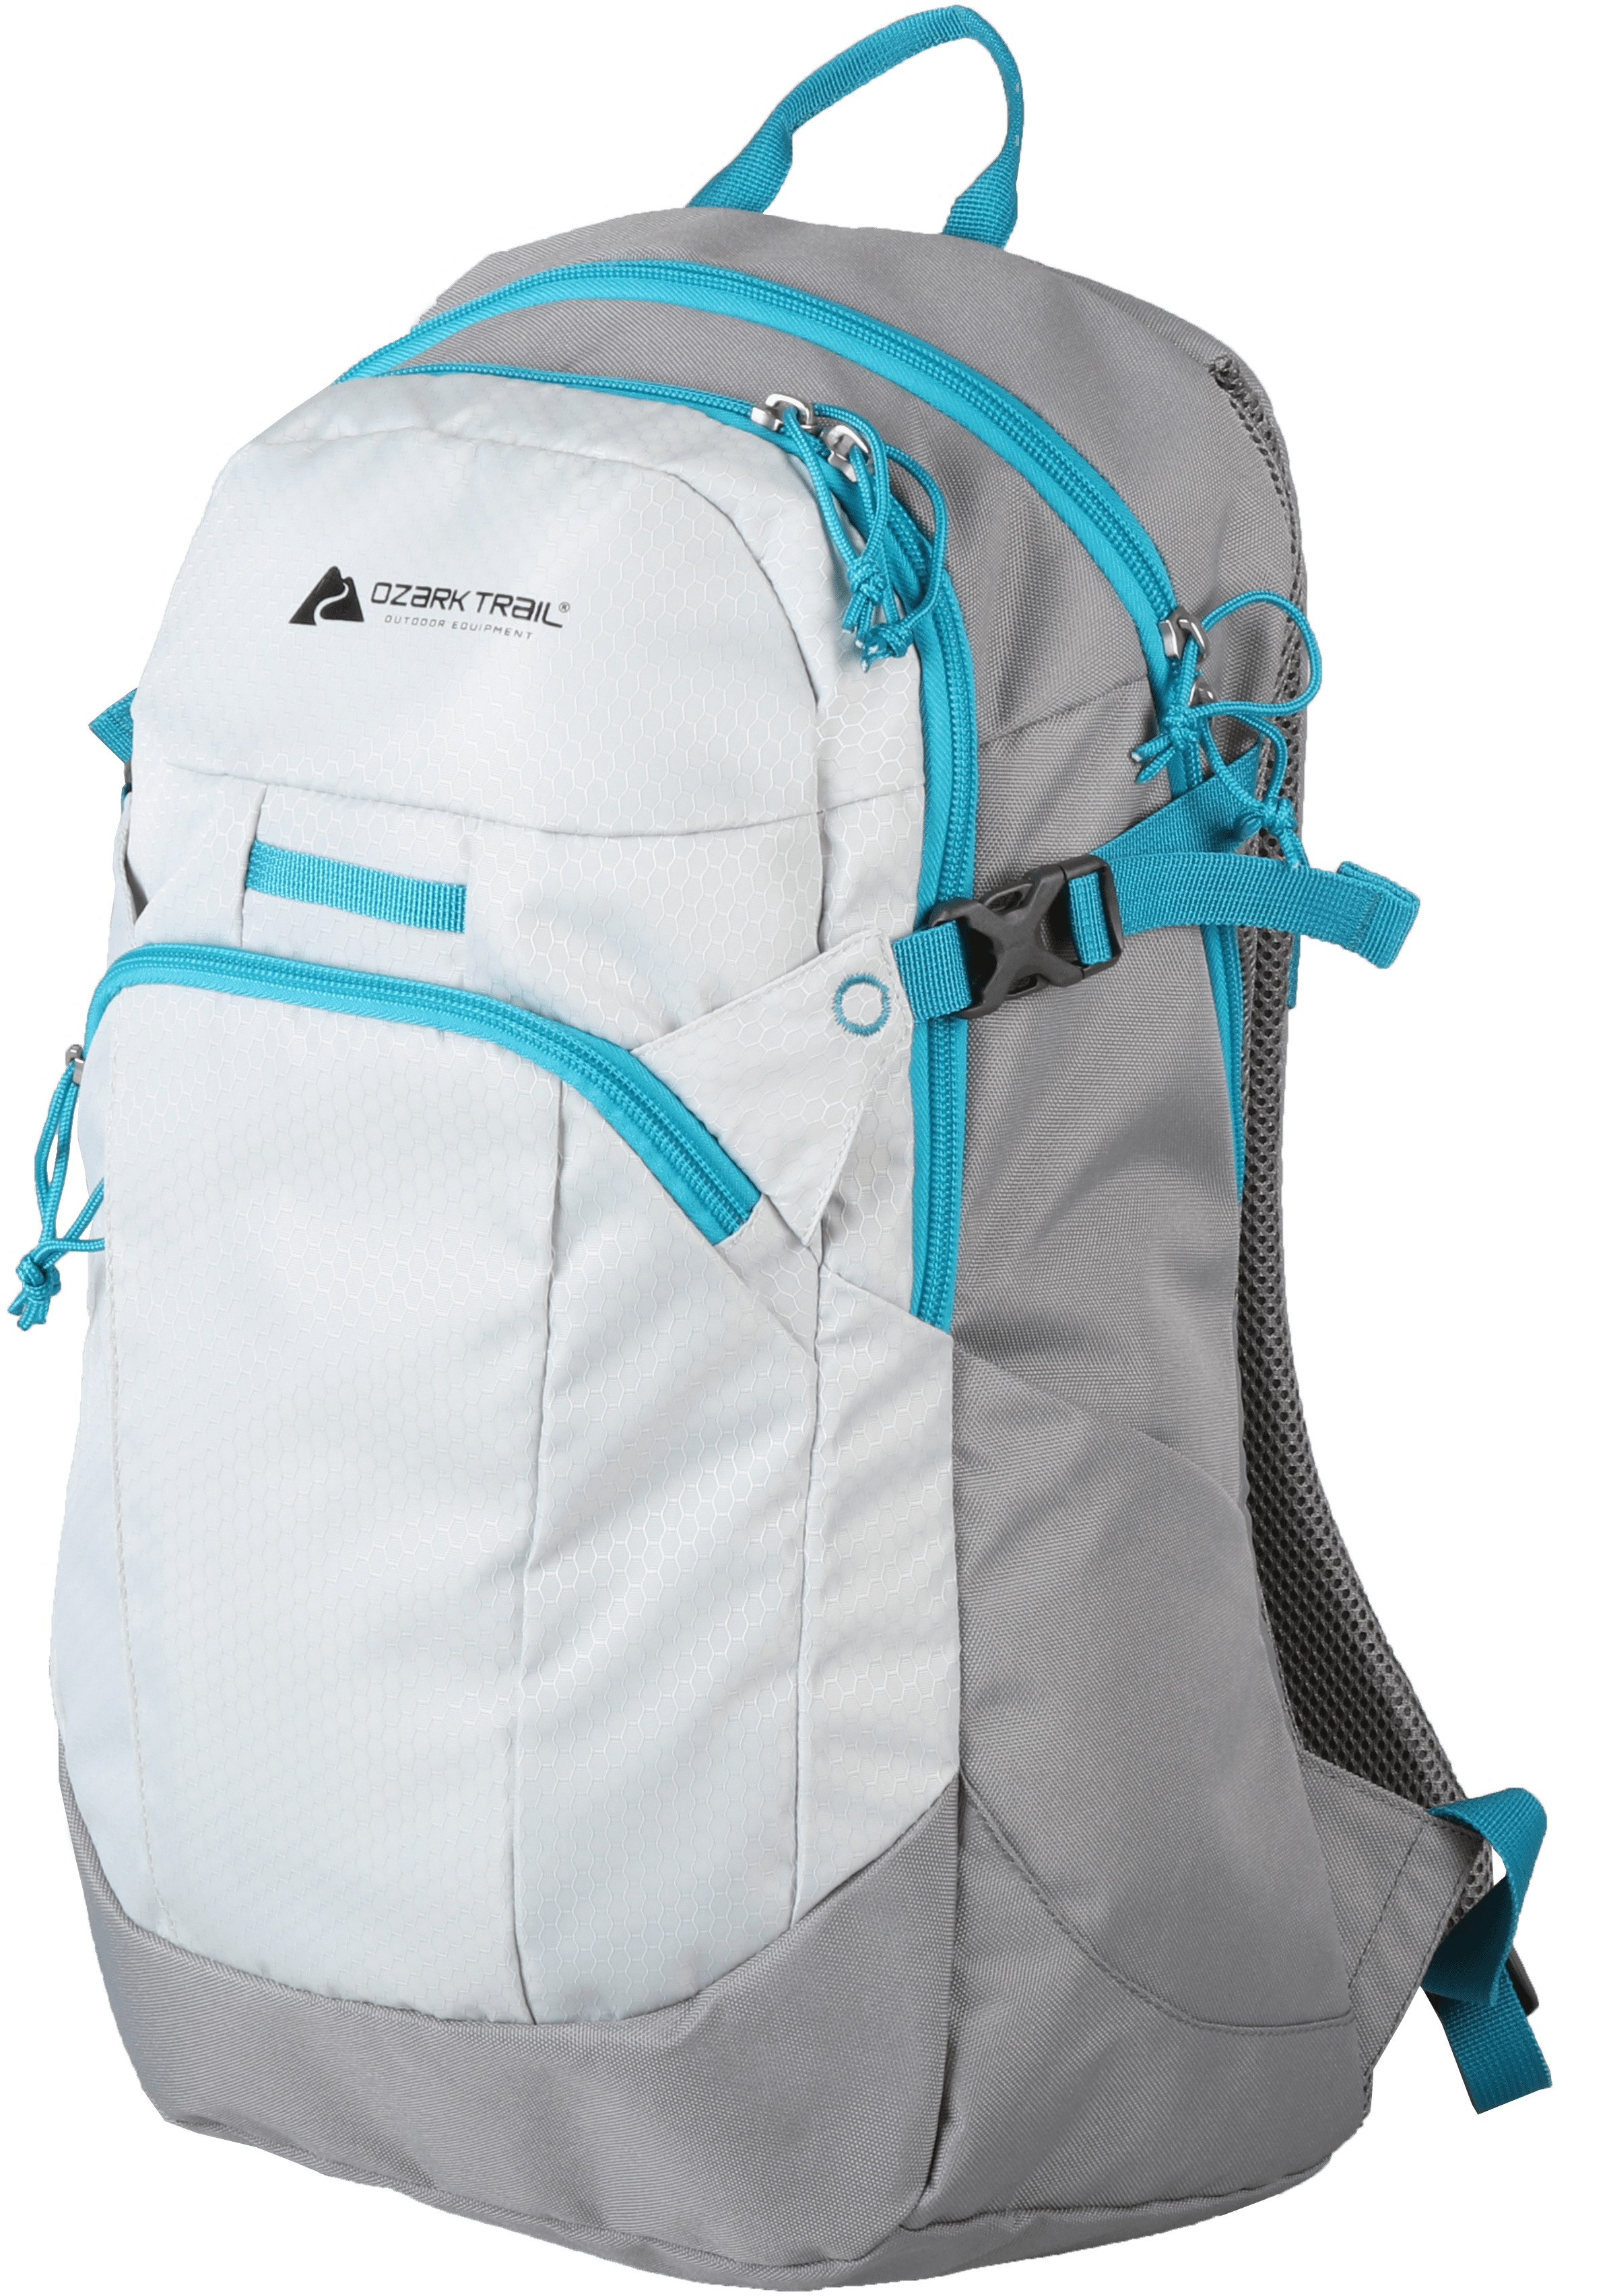 Ozark Trail 20 Liter Adult Unisex Backpacking Backpack, Ripstop fabric, Gray - image 2 of 5